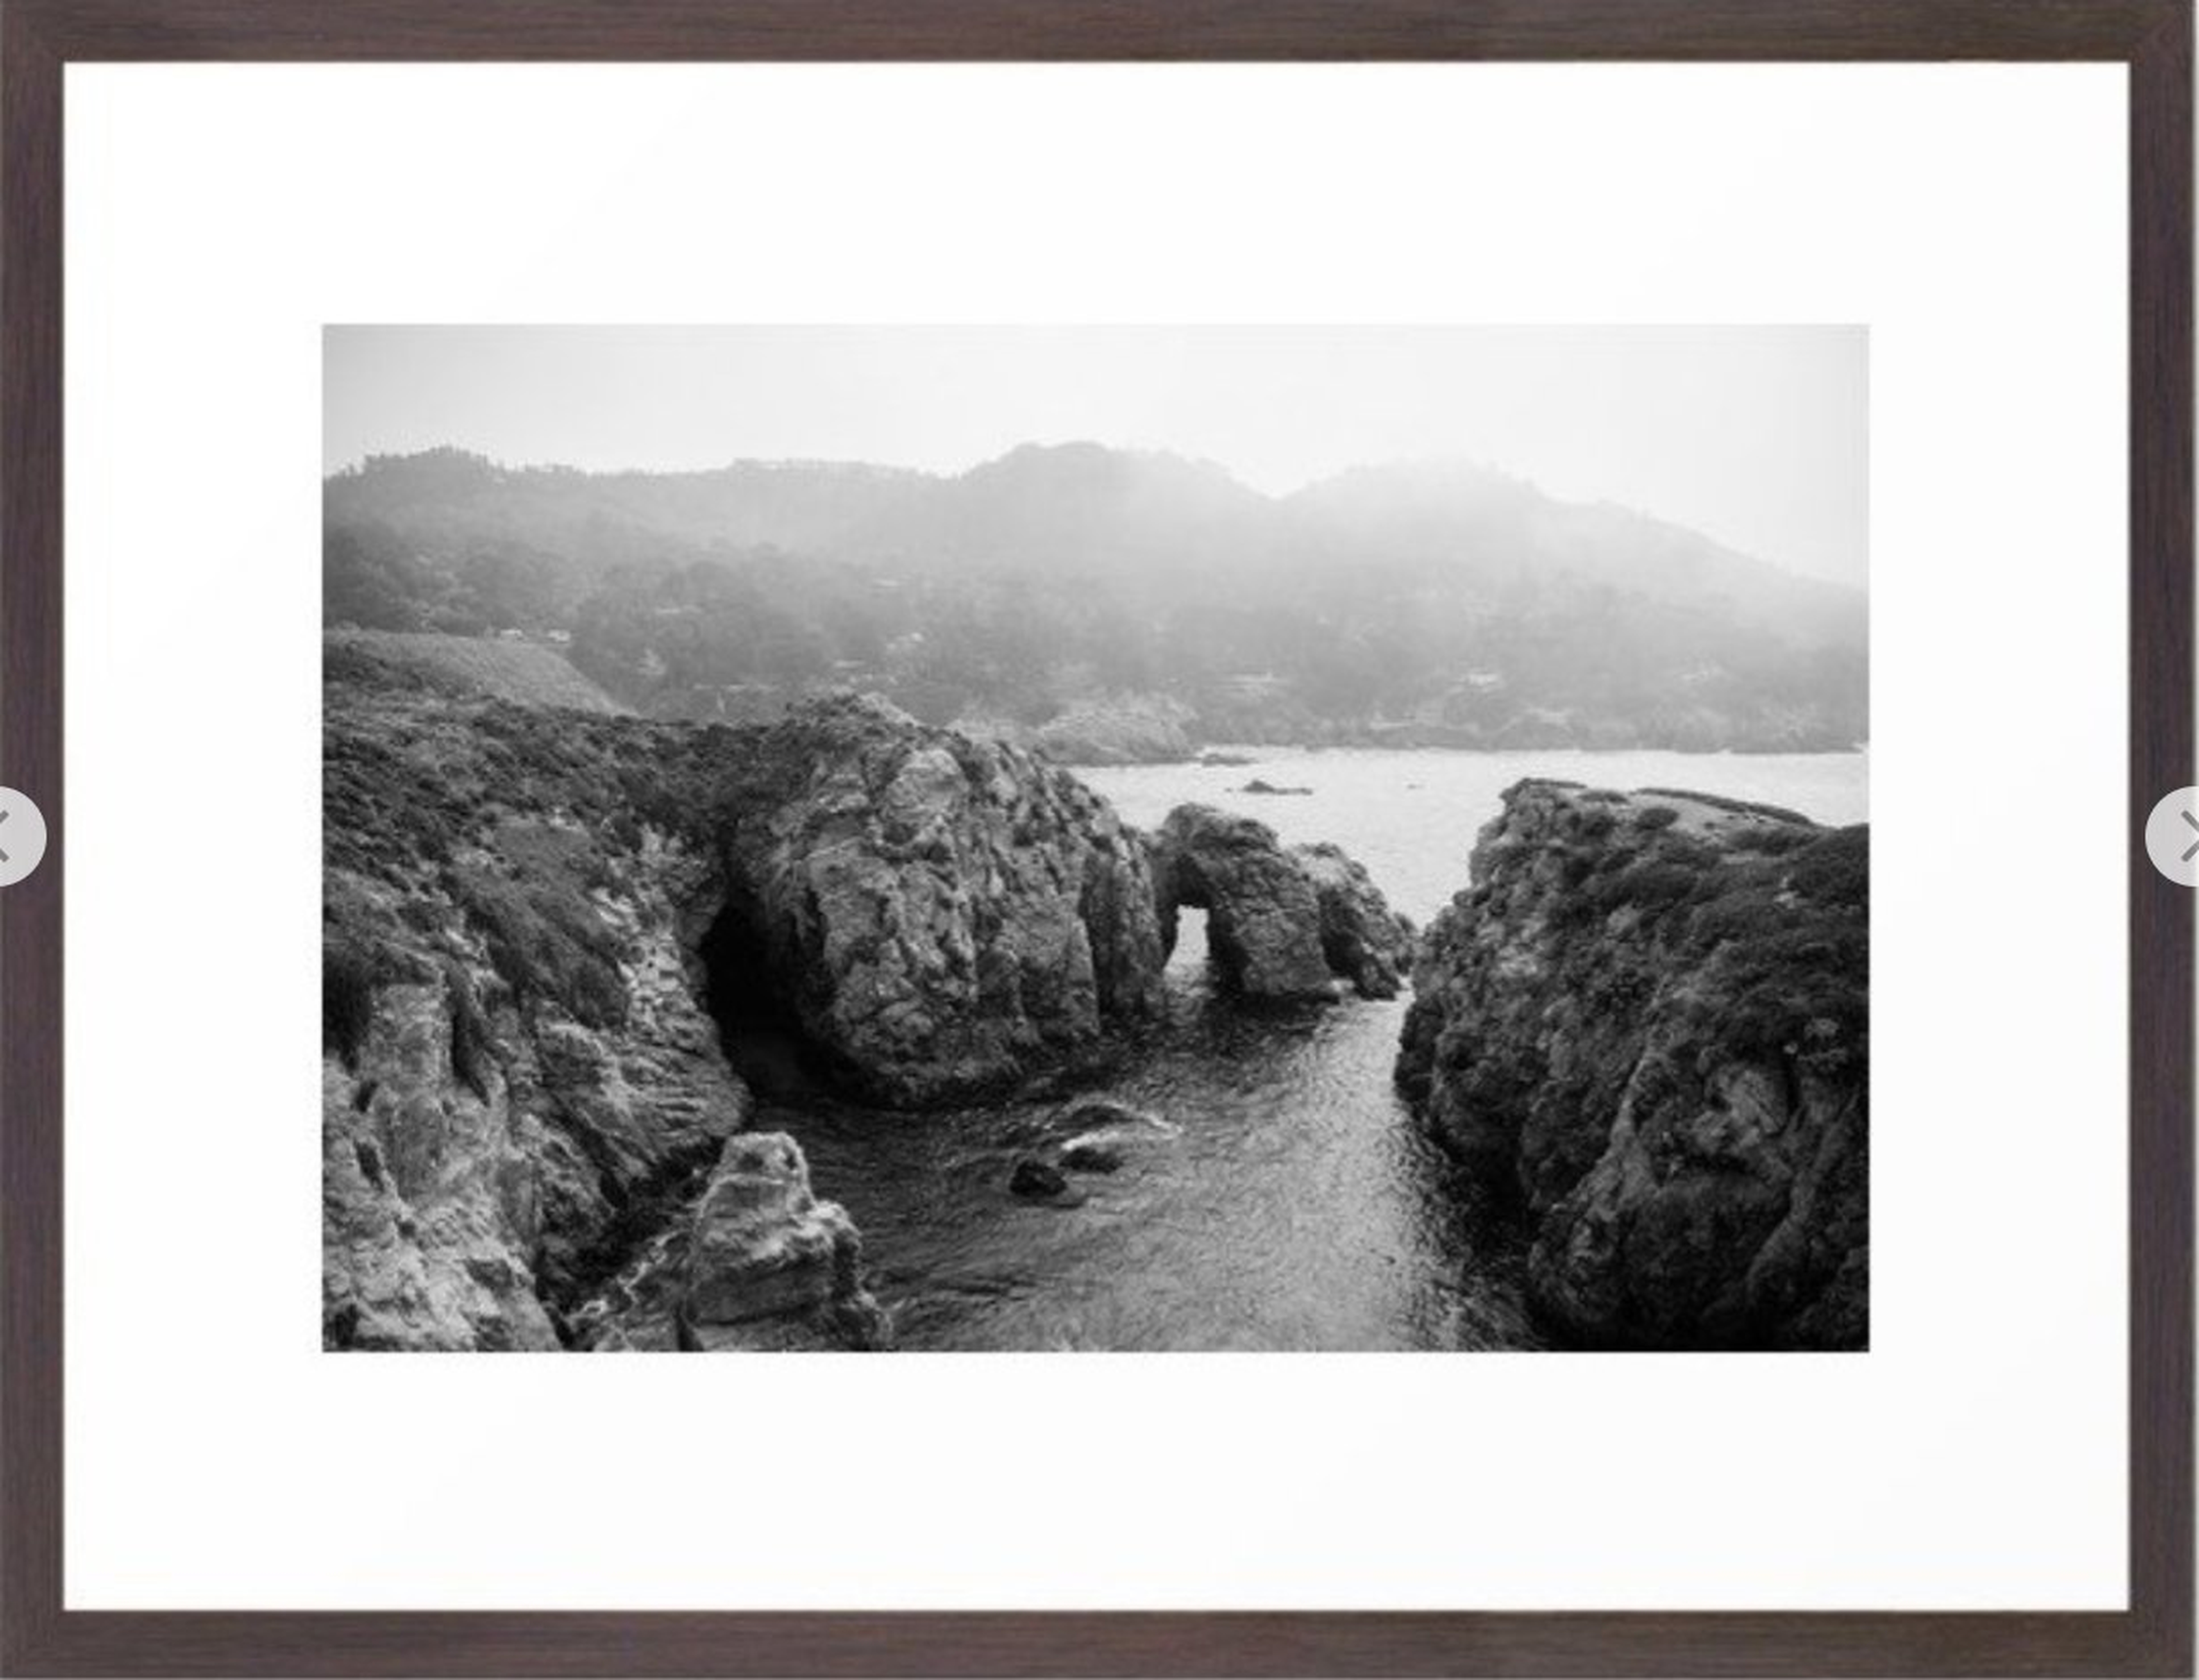 Ocean Arches - Black and White Landscape Photography Framed Art Print - Society6